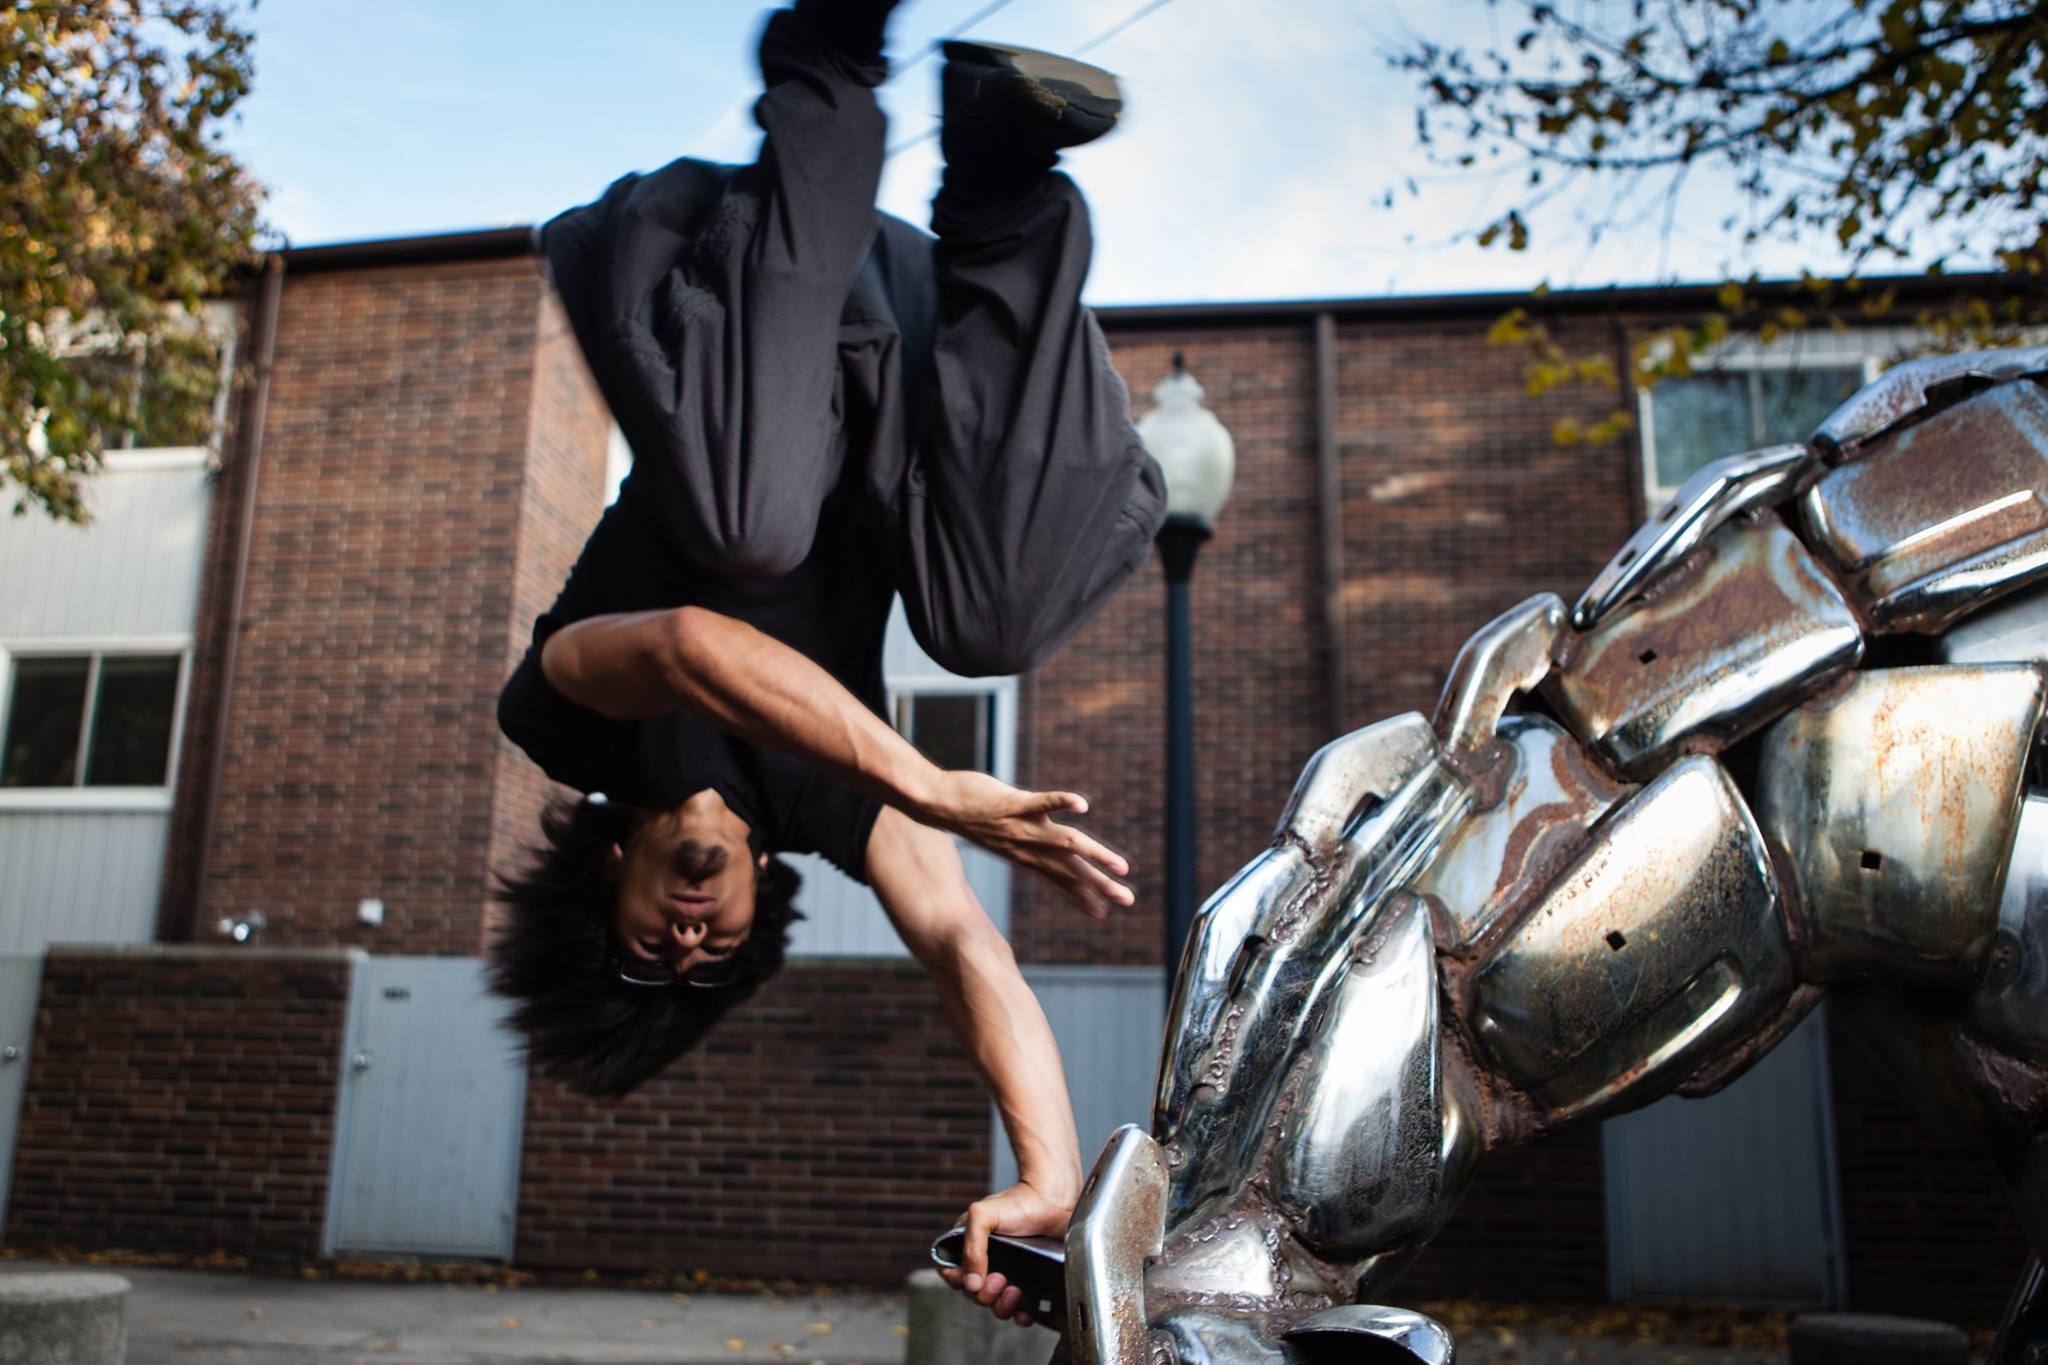   MOVE TO IMPROVE   Sharing our experience in Parkour &amp; Art du Déplacement since 2011.   Get Started  